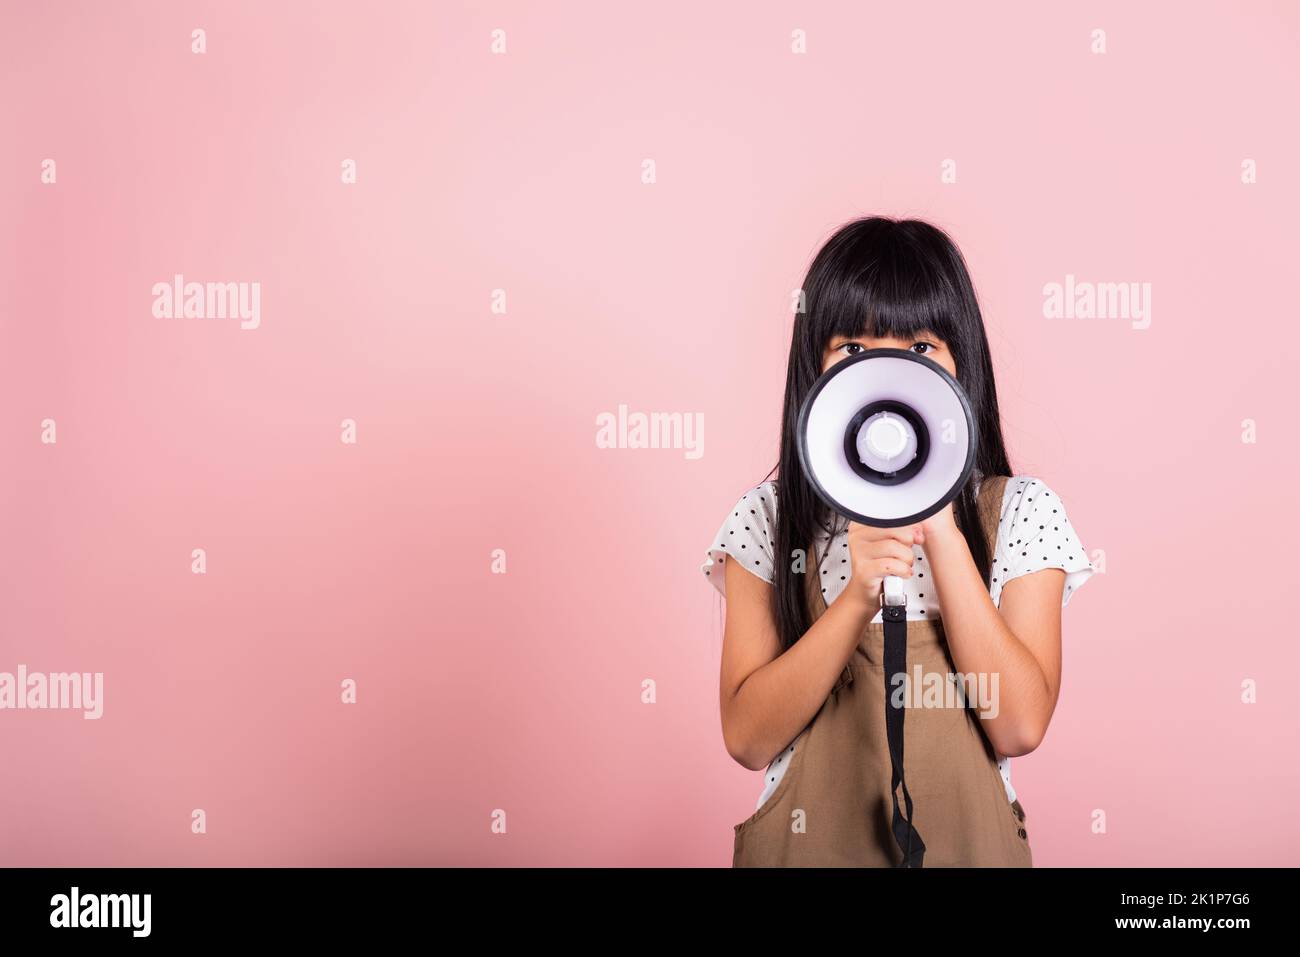 Asian little kid 10 years old shouting by megaphone at studio shot isolated on pink background, Happy child girl lifestyle she screeching through in m Stock Photo